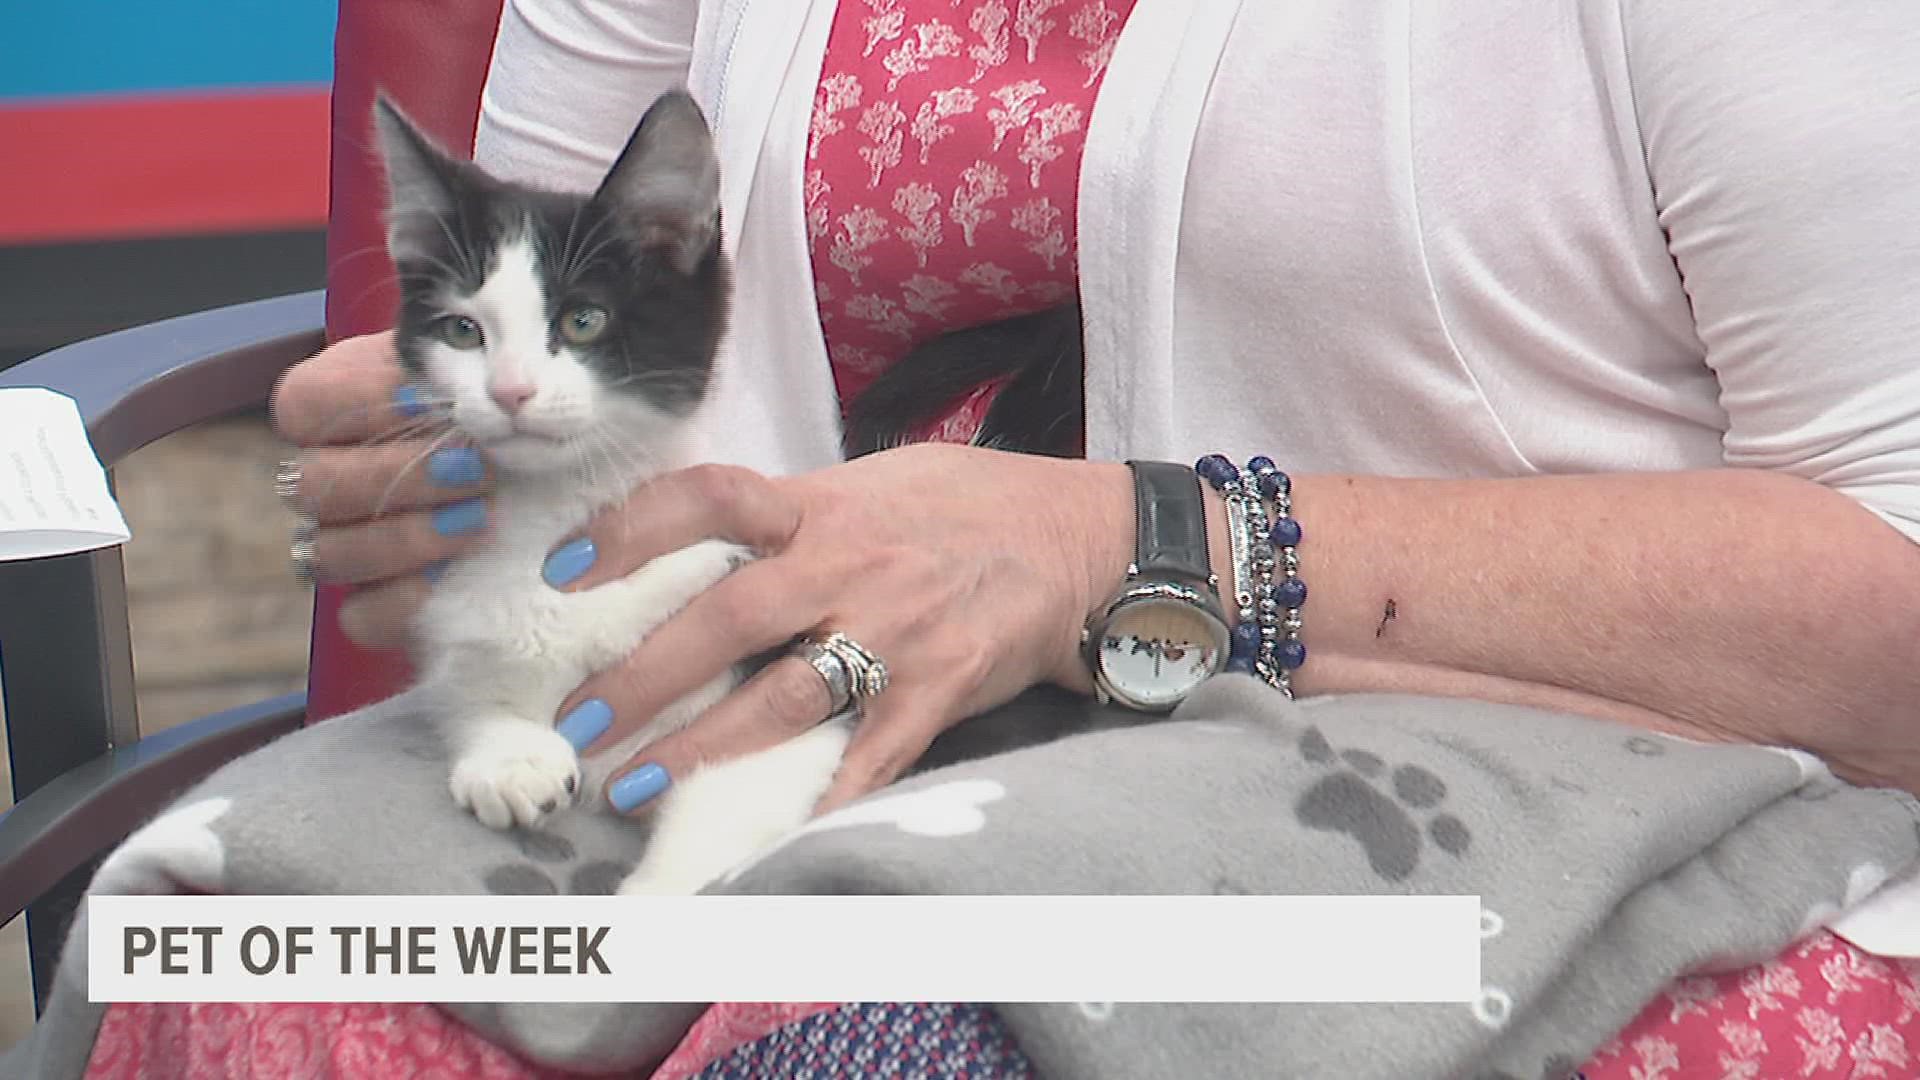 Bass is a 2-month-old kitten available for adoption from the Quad City Animal Welfare Center. He would do great in a household with dogs and kids.